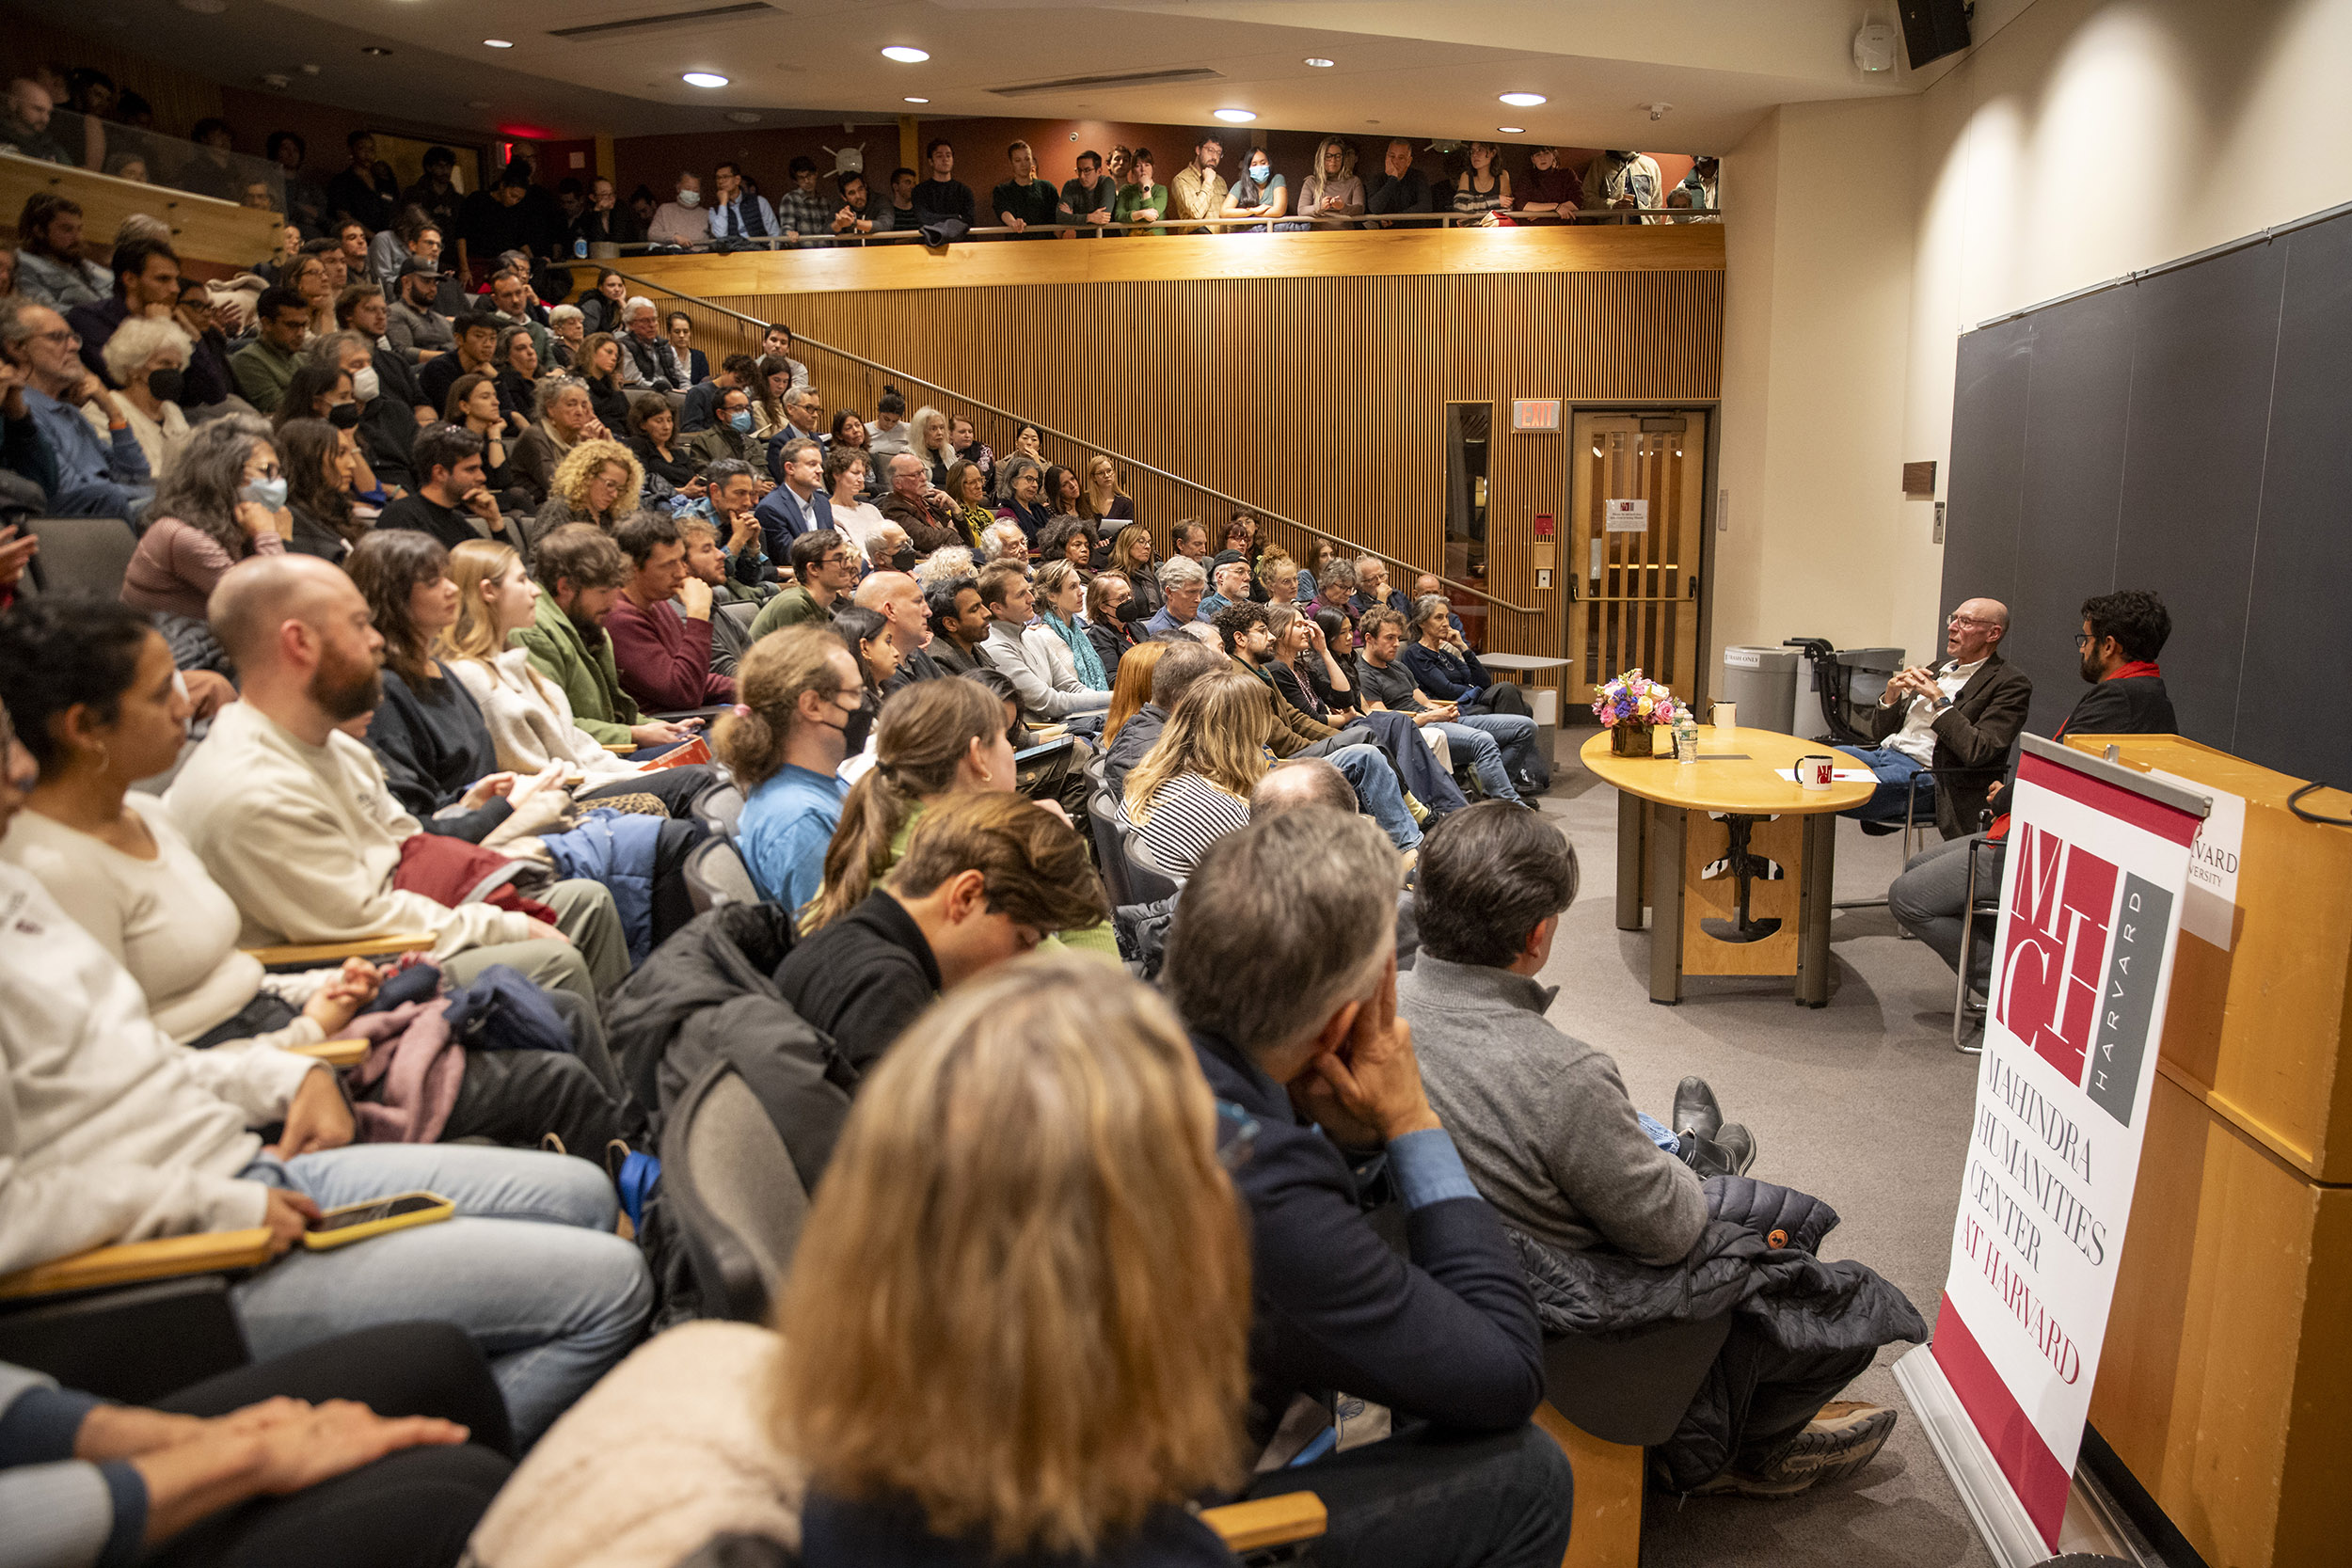 Michael Pollan (left) and Bruno Carvalho speaking in front of a full audience during the event.